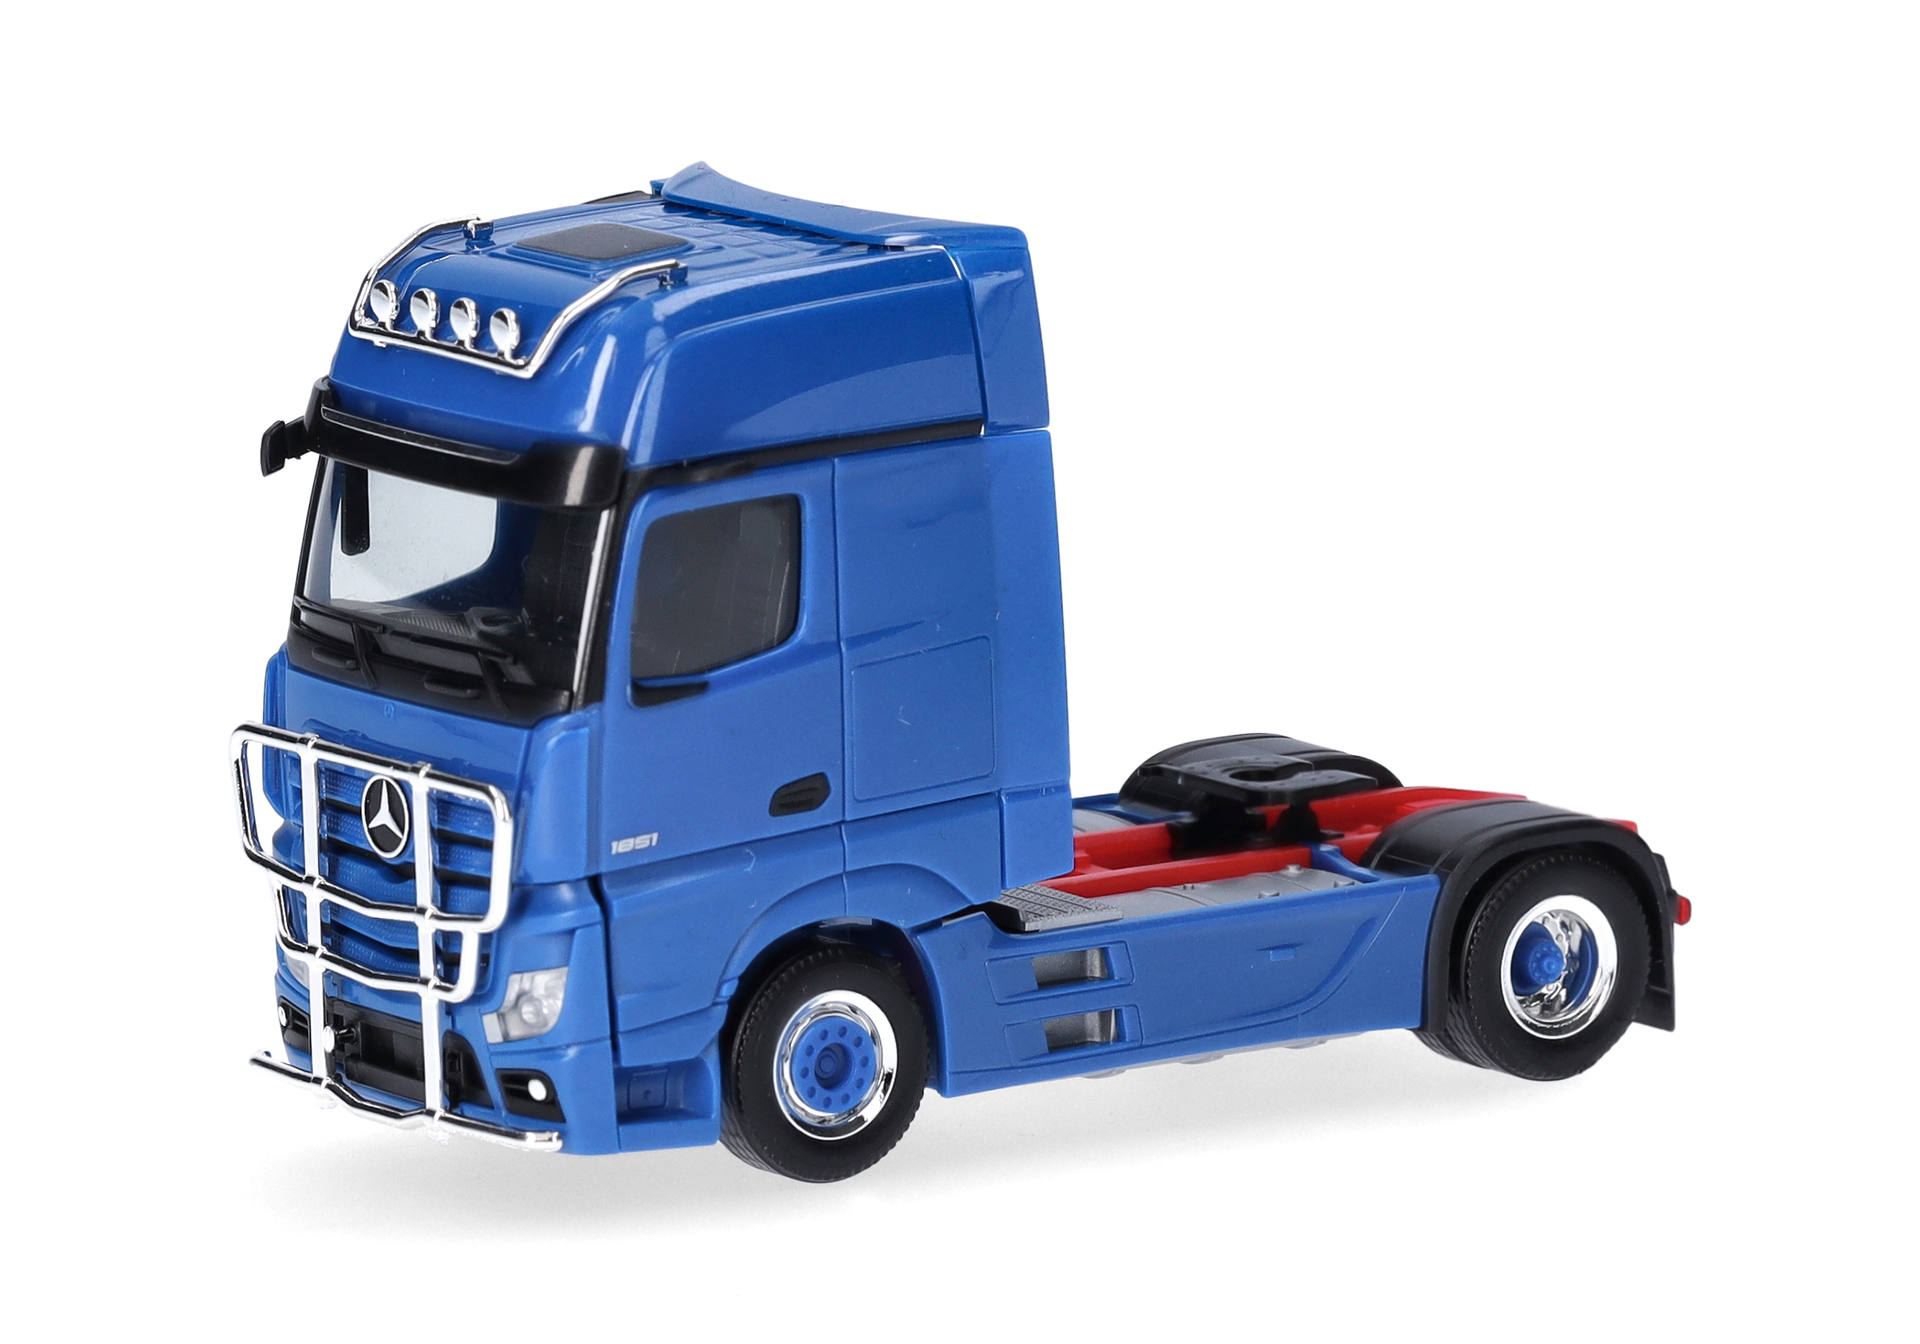 Mercedes-Benz Actros Gigaspace rigid tractor 2-axles with light bar and ram protection, gentian blue